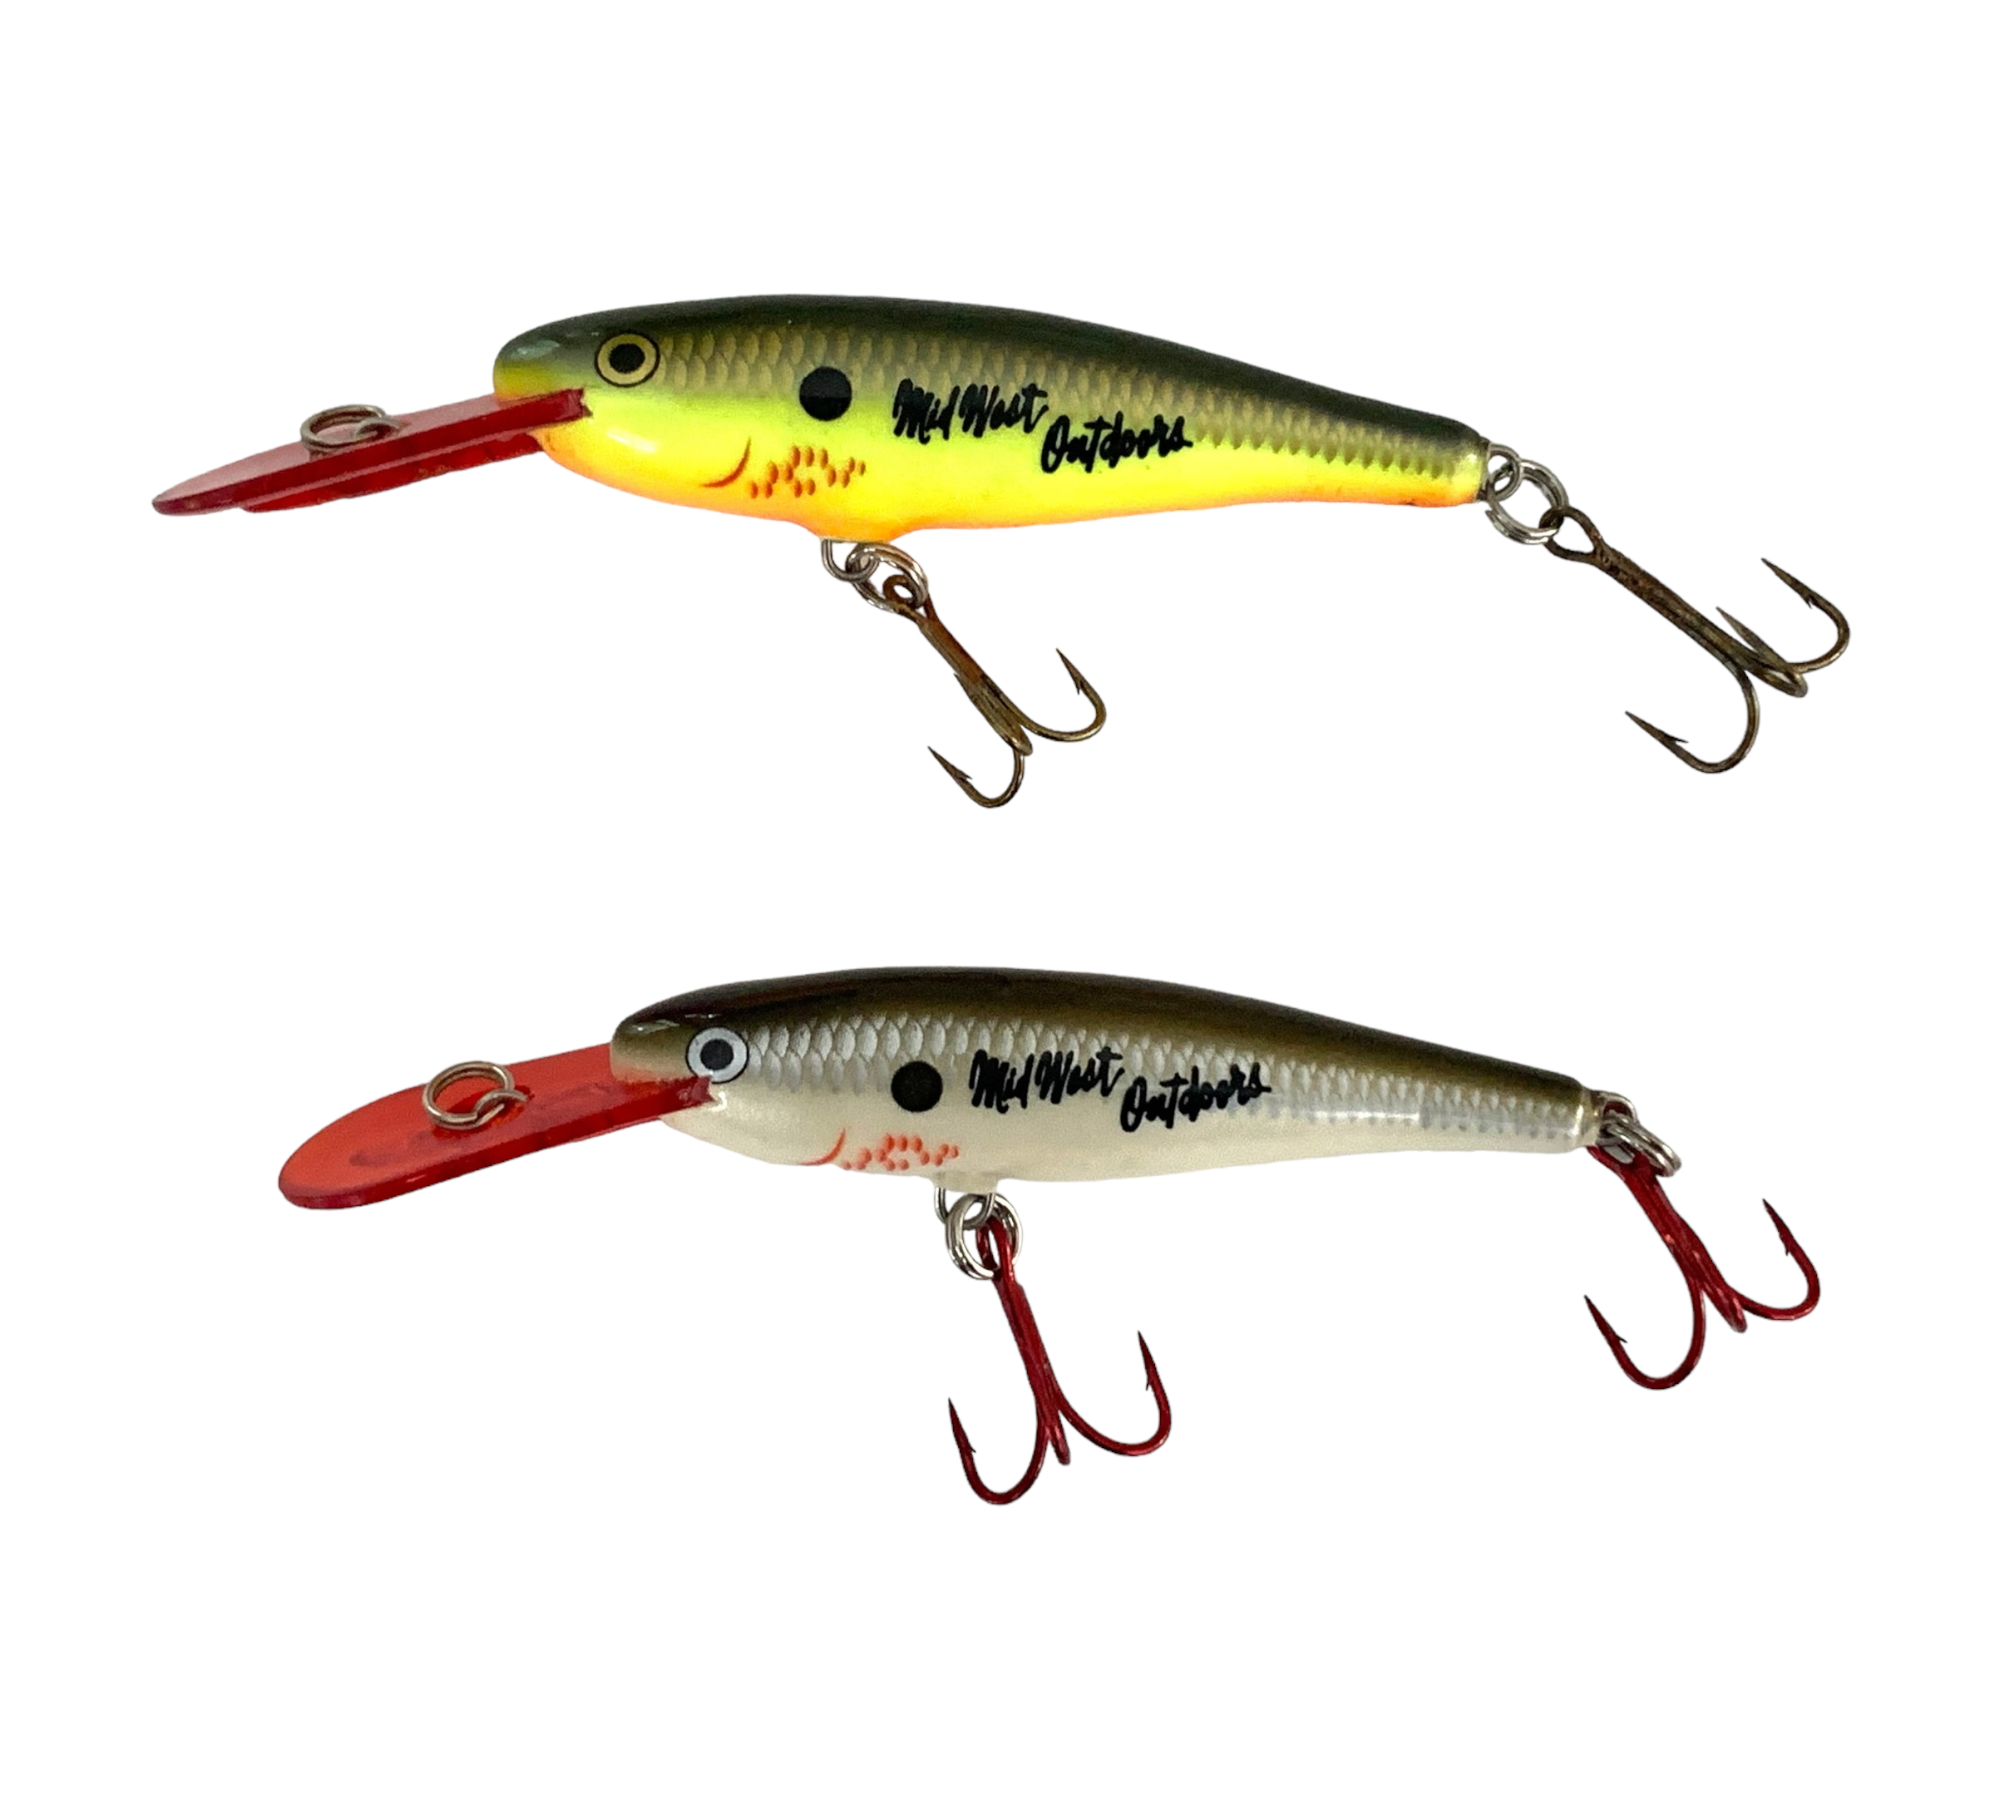 Lot of 2 RAPALA MINNOW RAP Fishing Lures • MIDWEST OUTDOORS – Toad Tackle